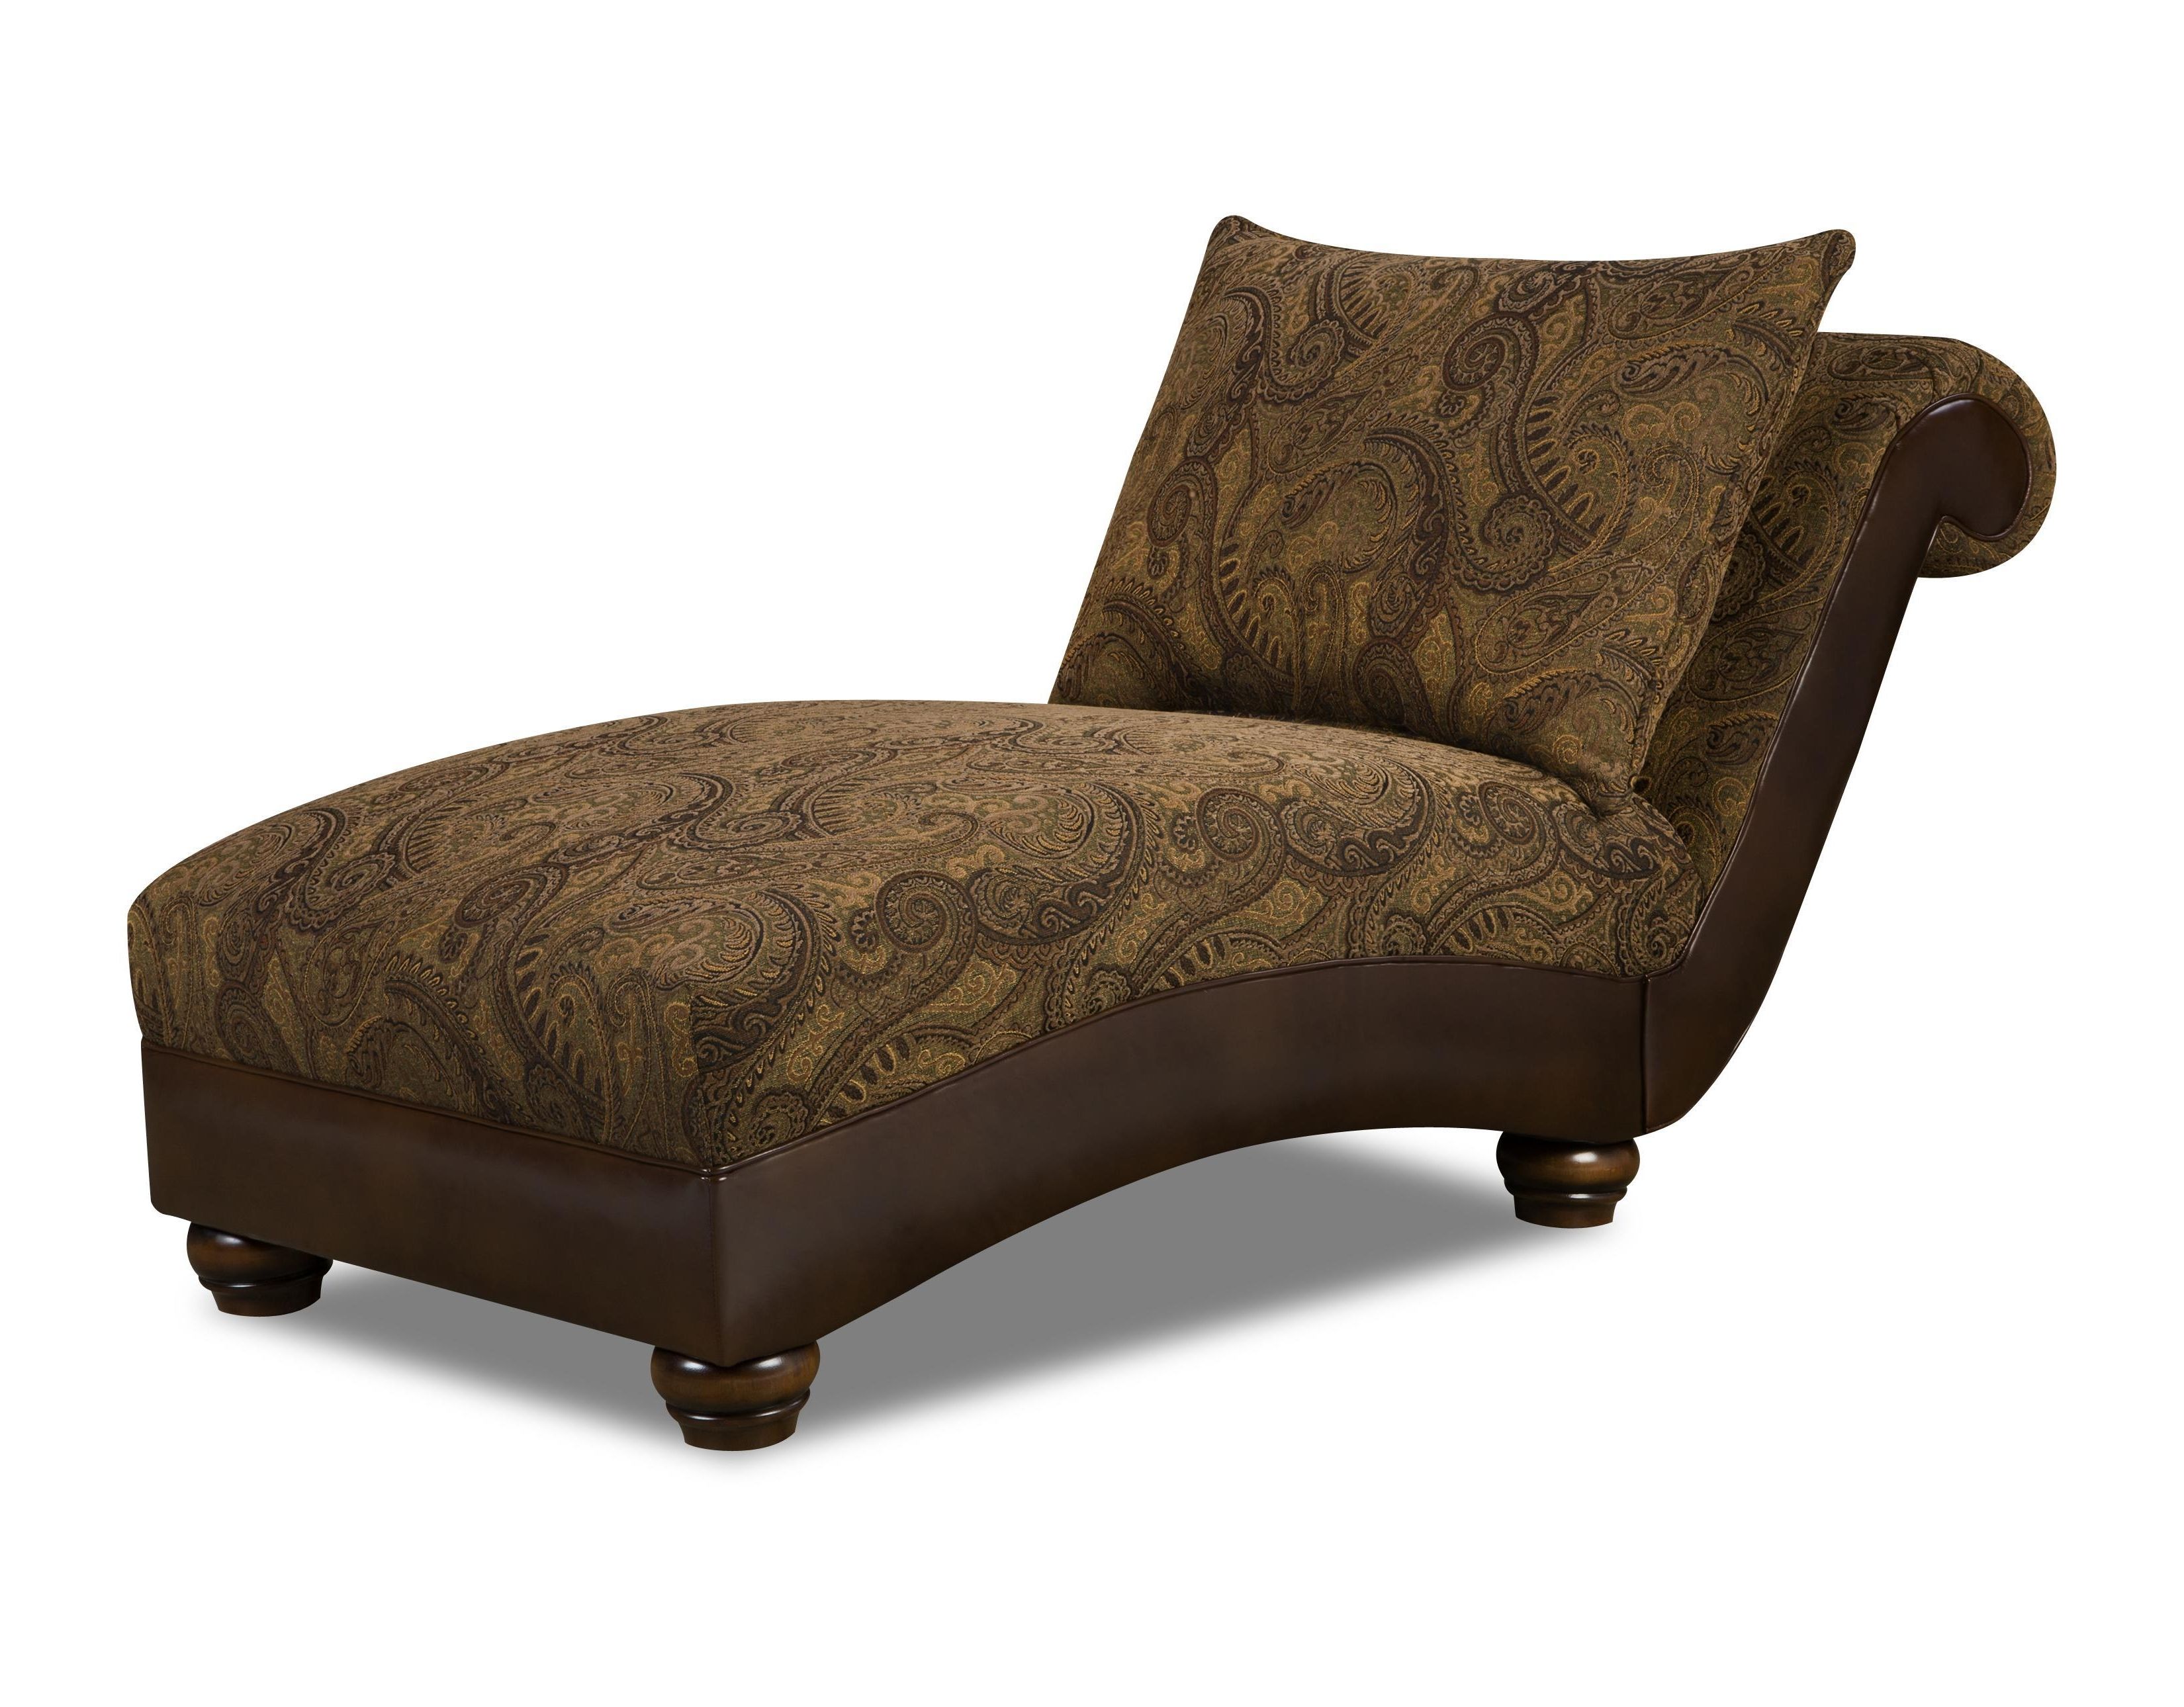 Overstock Chaise Lounges Intended For Most Up To Date Overstock Chaise Lounge Chairs – Lounge Chairs (View 3 of 15)